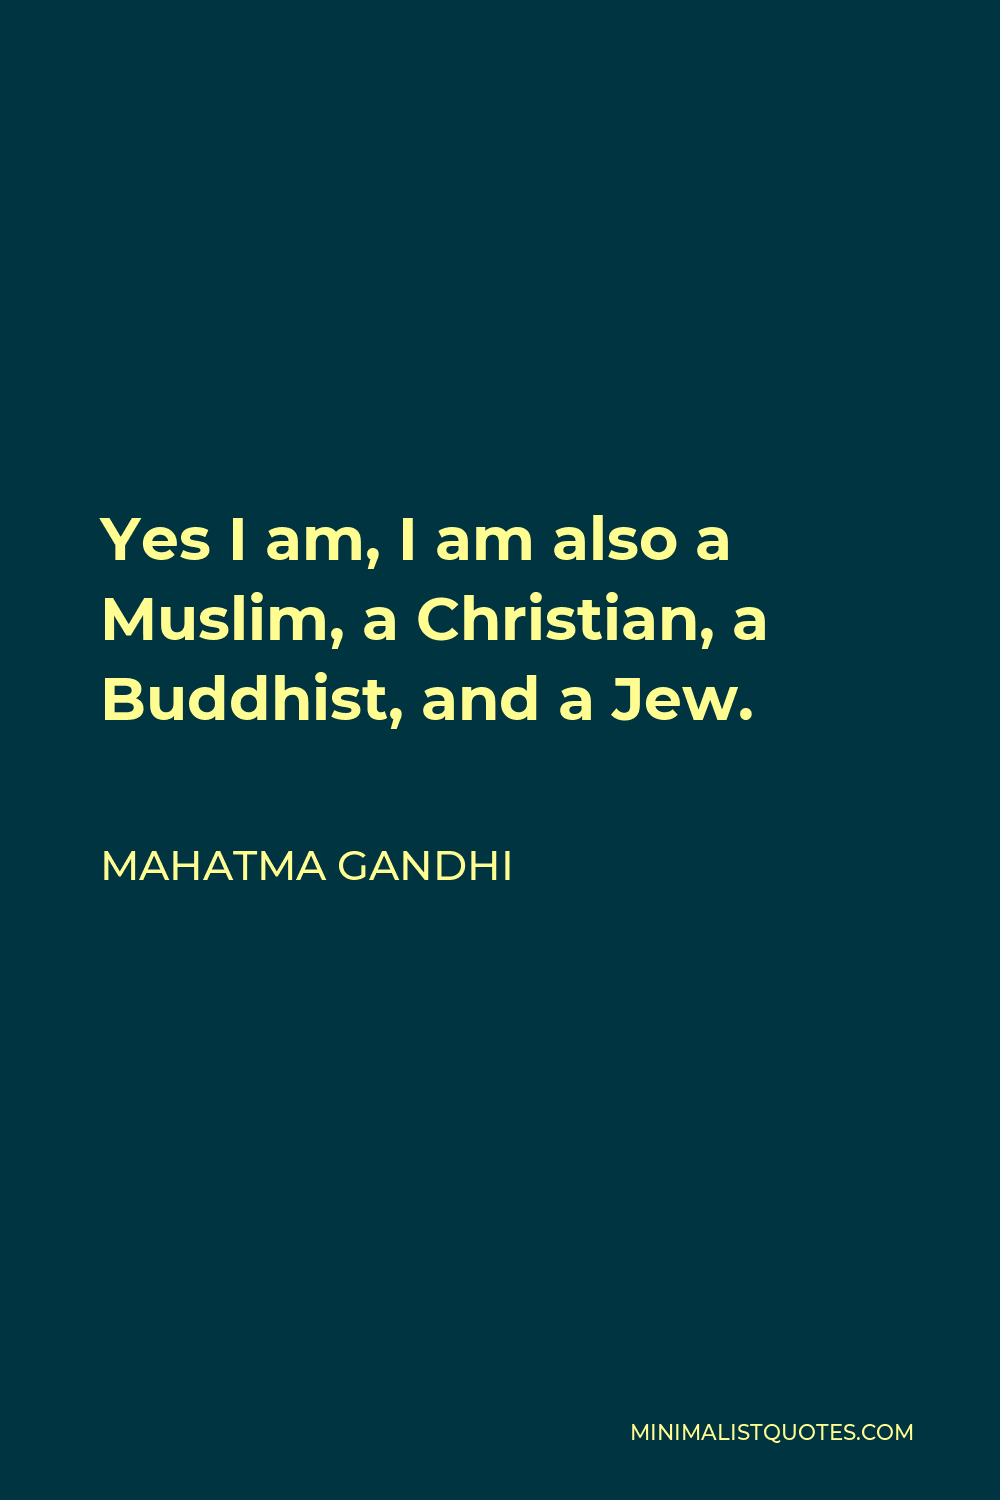 Mahatma Gandhi Quote - Yes I am, I am also a Muslim, a Christian, a Buddhist, and a Jew.